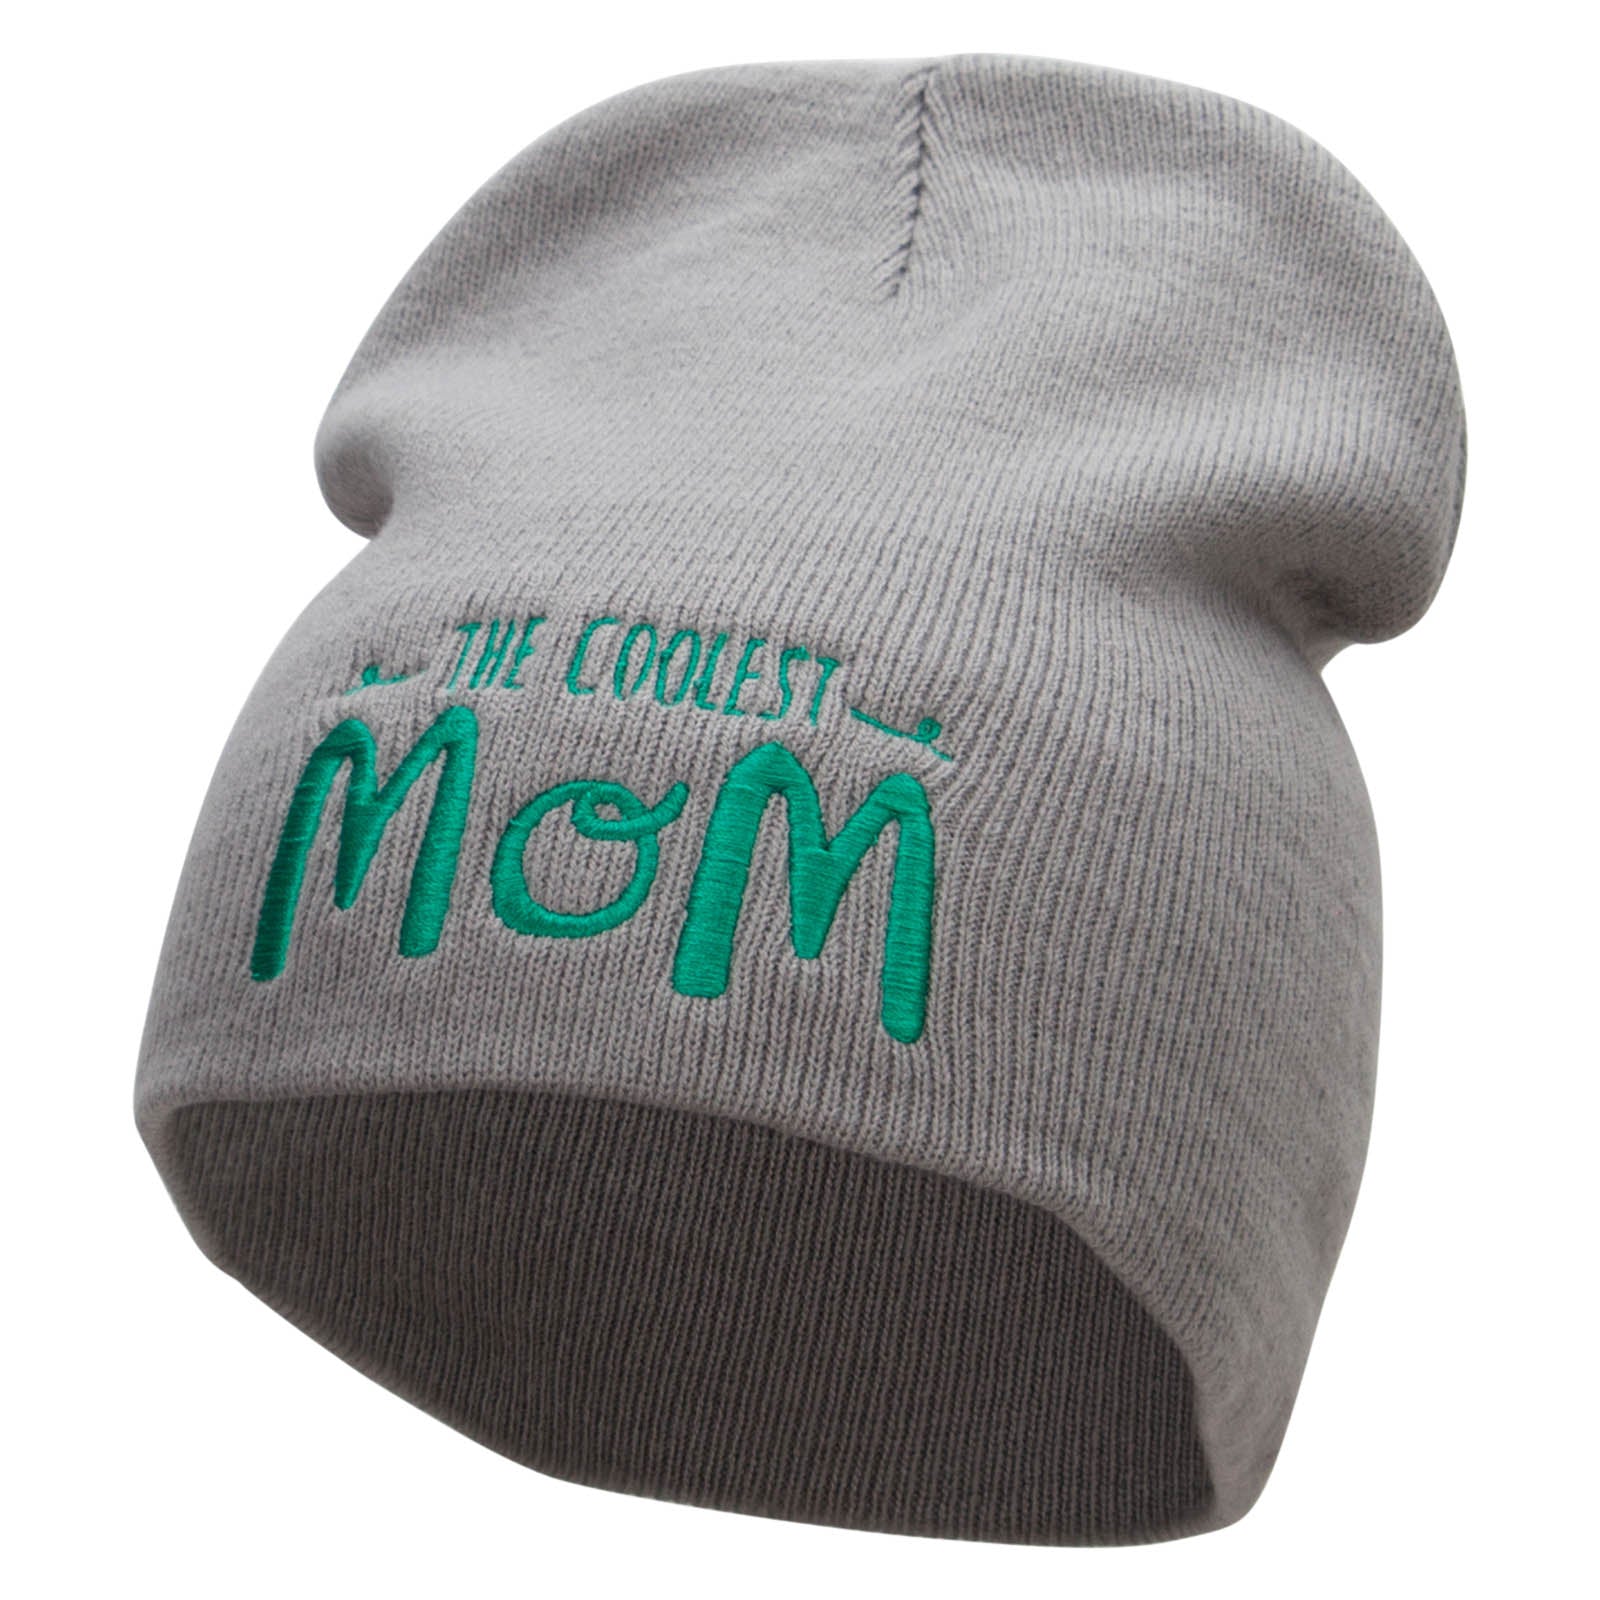 The Coolest Mom Embroidered 8 inch Acrylic Short Blank Beanie - Grey OSFM